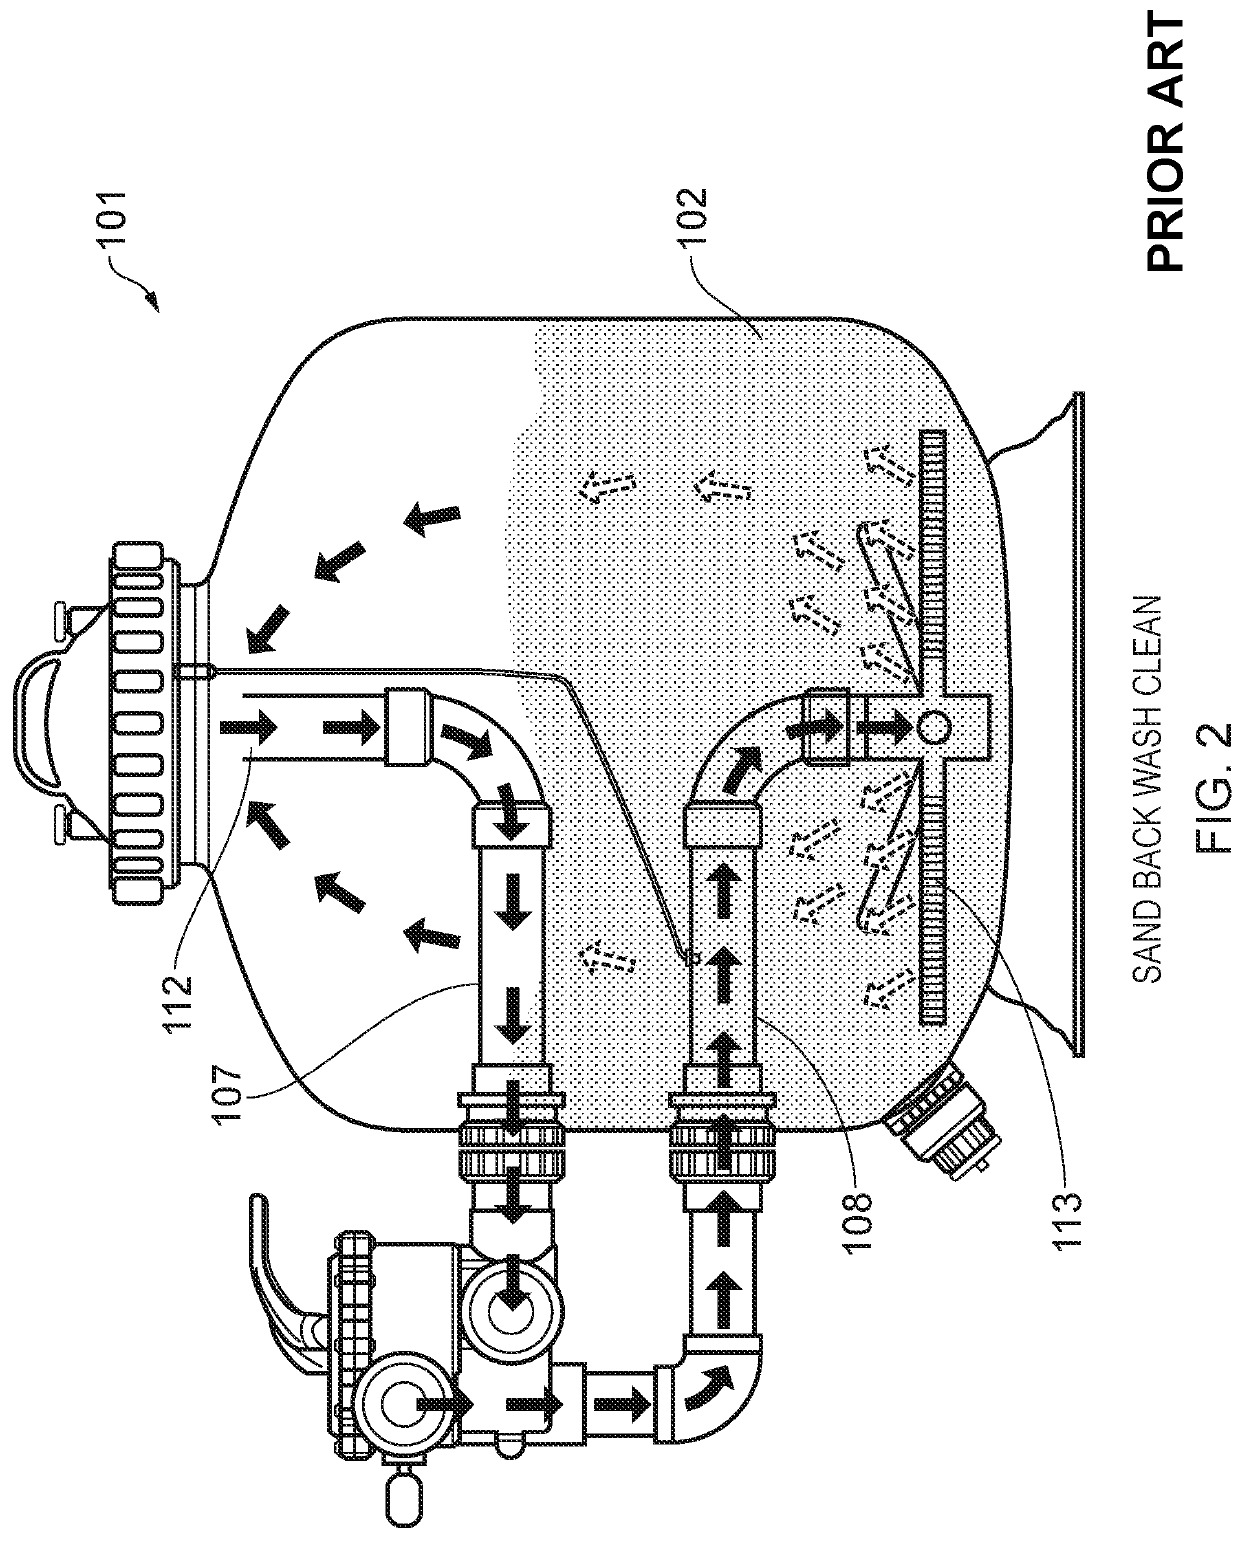 Mechanical filter element, apparatus and method